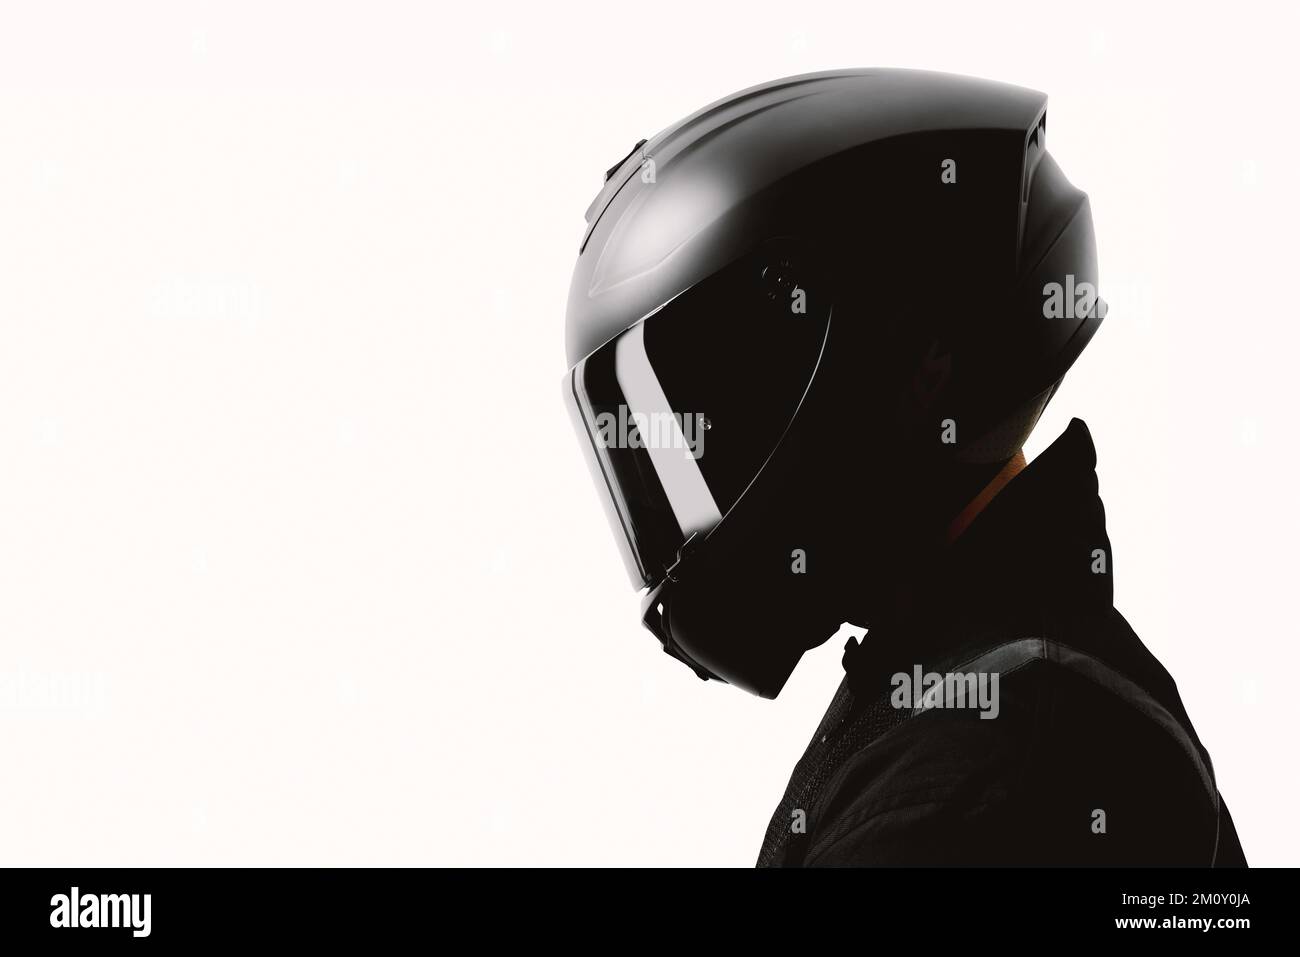 Portrait of a motorcycle rider posing with a black helmet on a white background. Stock Photo